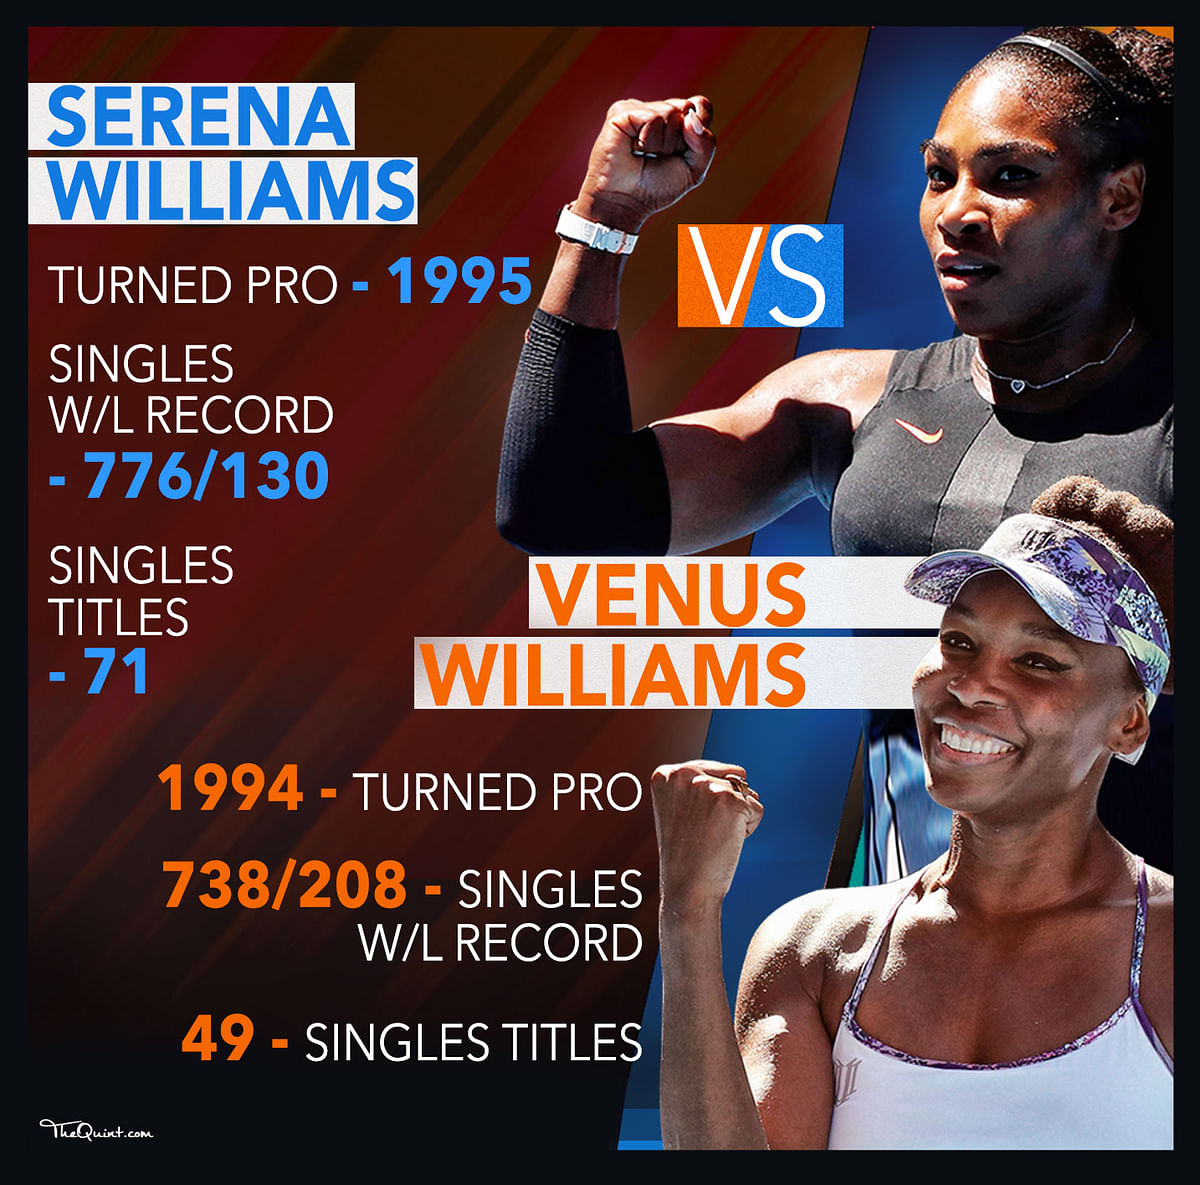 Take a look at the head-to-head record of Serena and Venus Williams ahead of the Australian Open final.